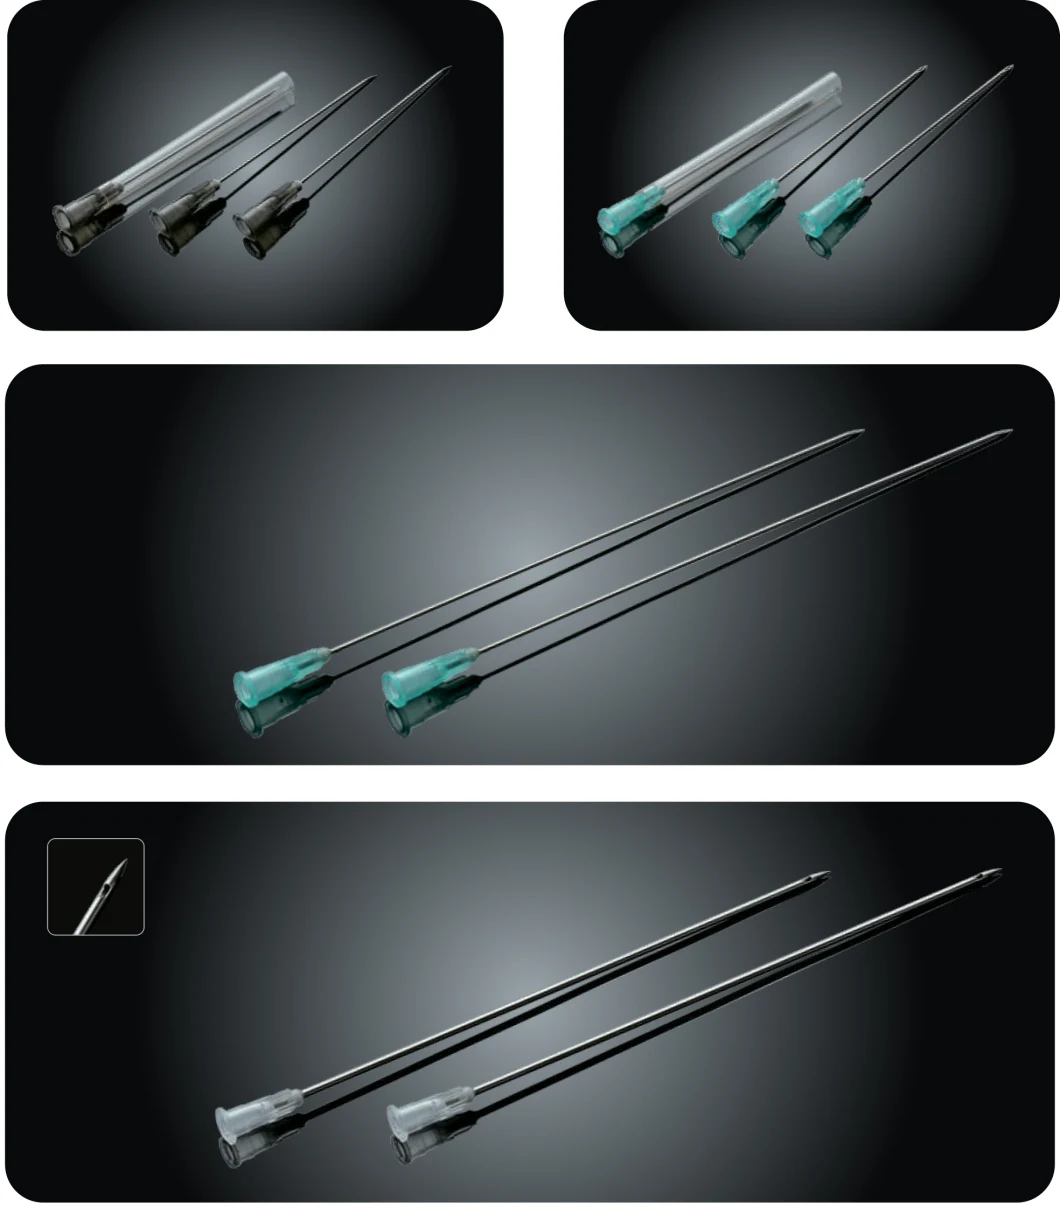 Disposable Hypodermic Syringe Needle Sizes with Ce and ISO